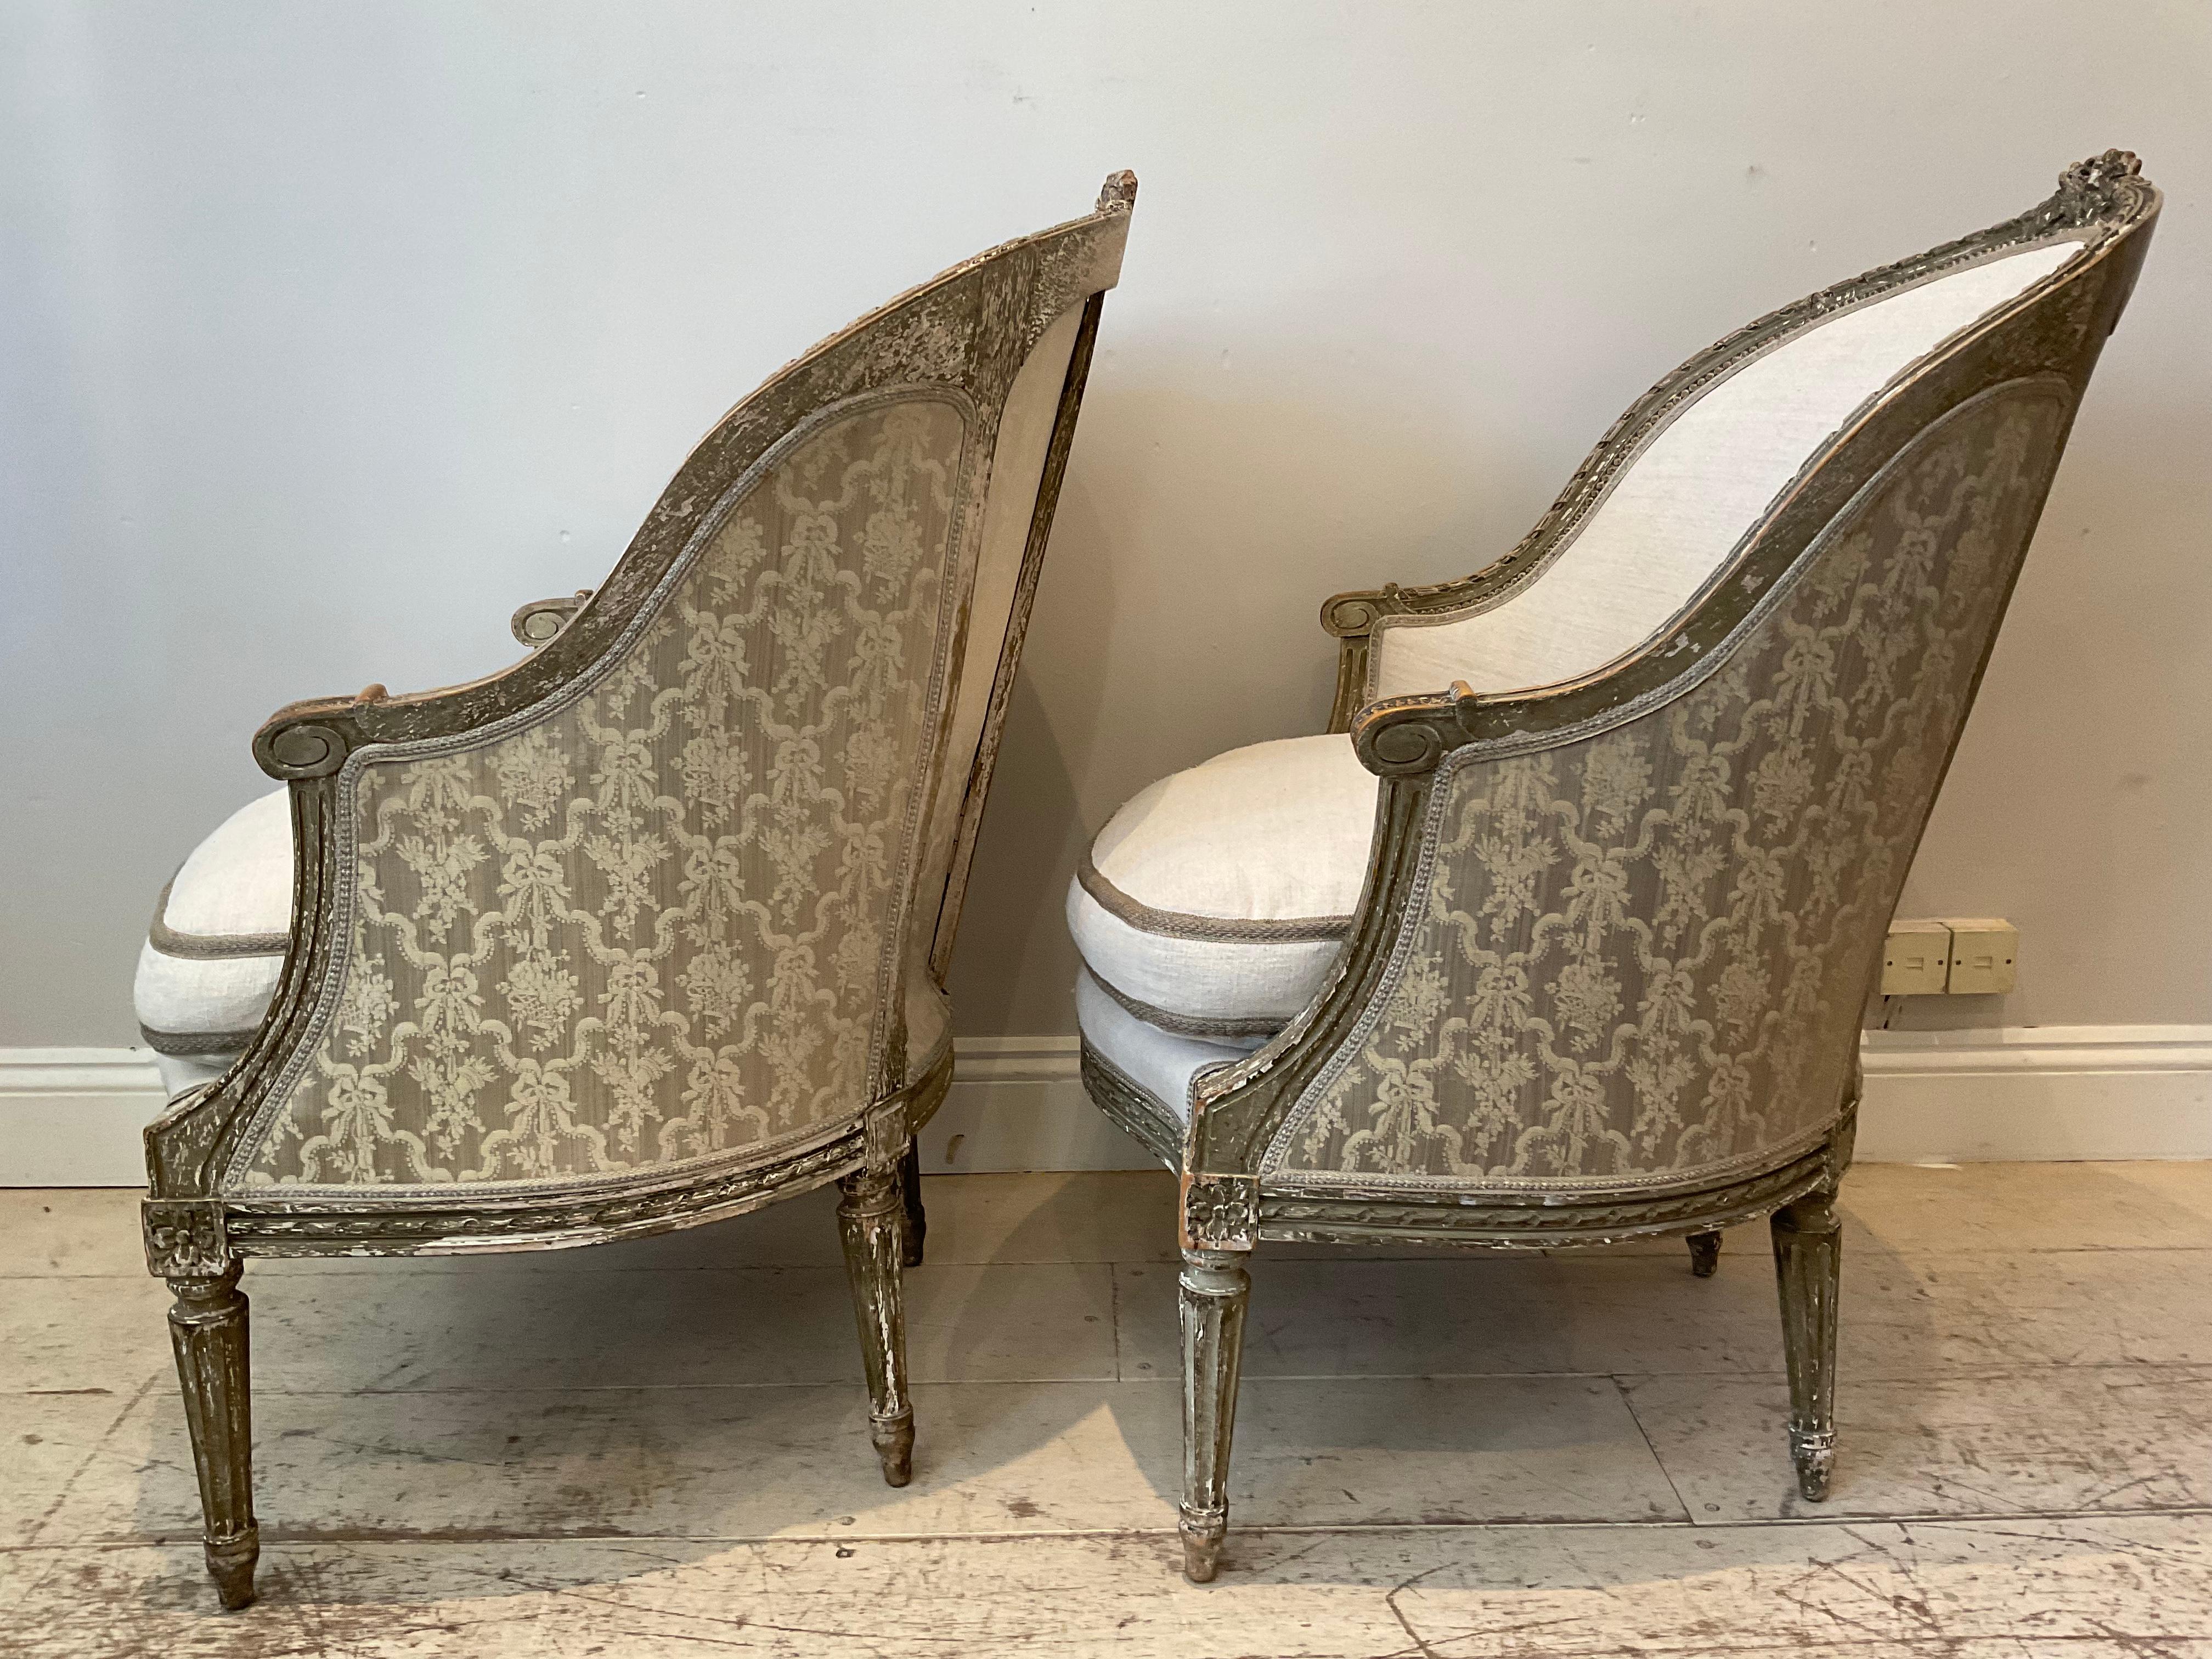 Early 20th Century Pair of 1920s Swedish Painted Armchairs Upholstered in French Linen